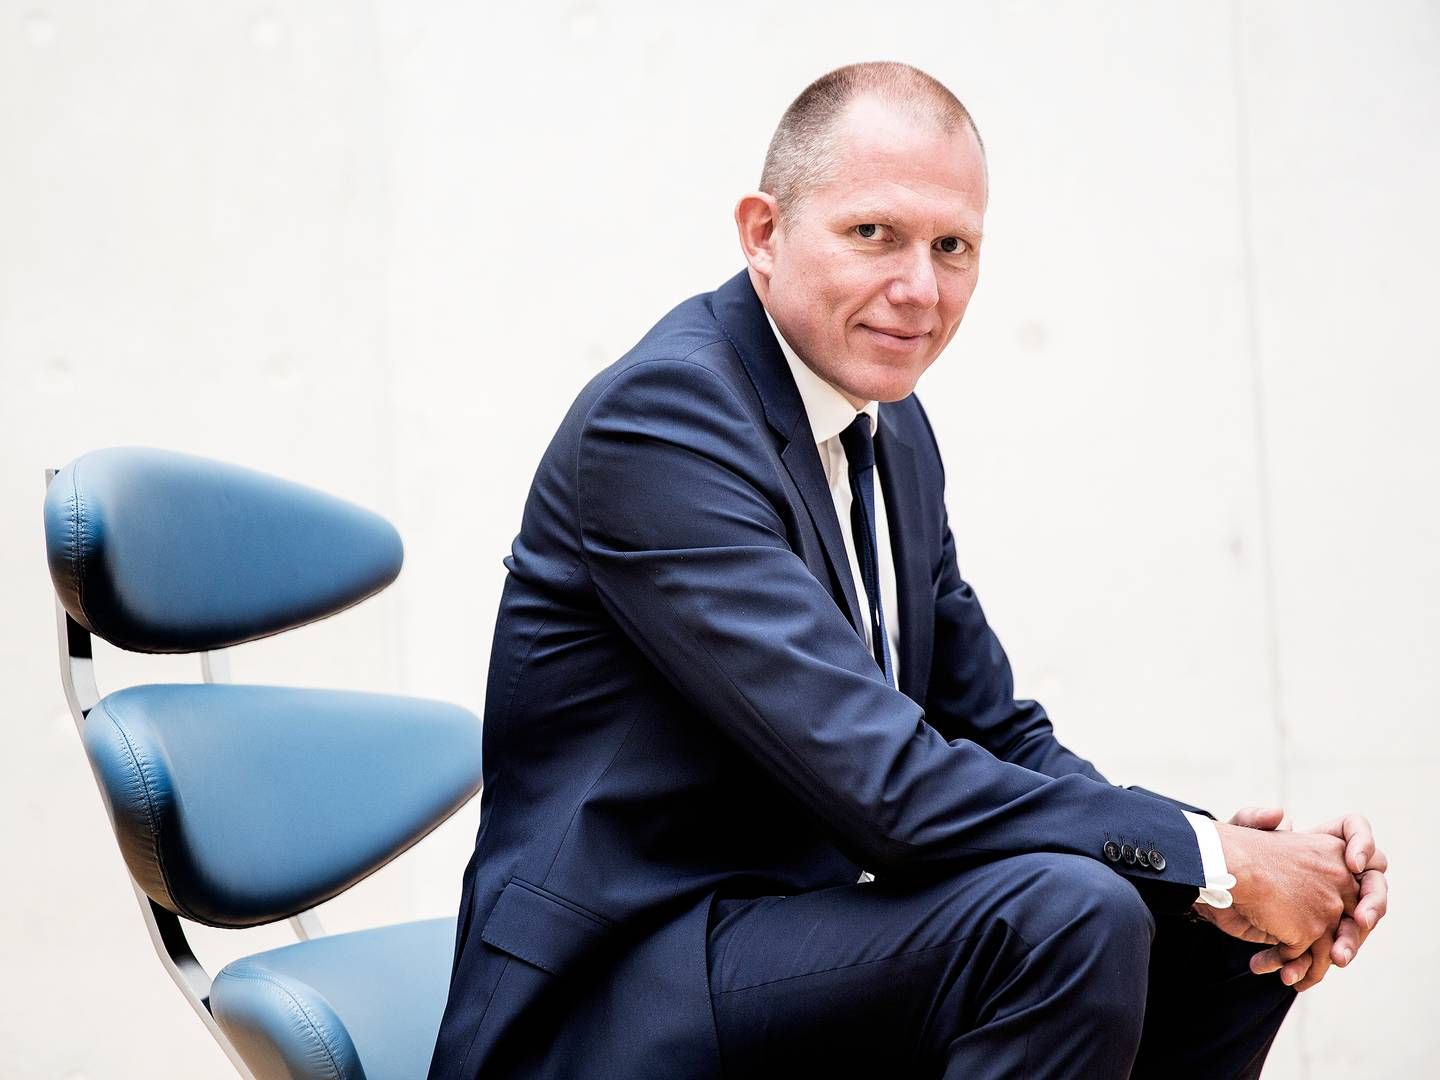 On Feb. 1, Jens Bjørn Andersen will be presenting his last annual financial statement at the helm of DSV. Jens Lund will assume the position of CEO of the Danish logistics group in October this year at the latest. | Photo: Bidstrup Stine/Jyllands-Posten/Ritzau Scanpix